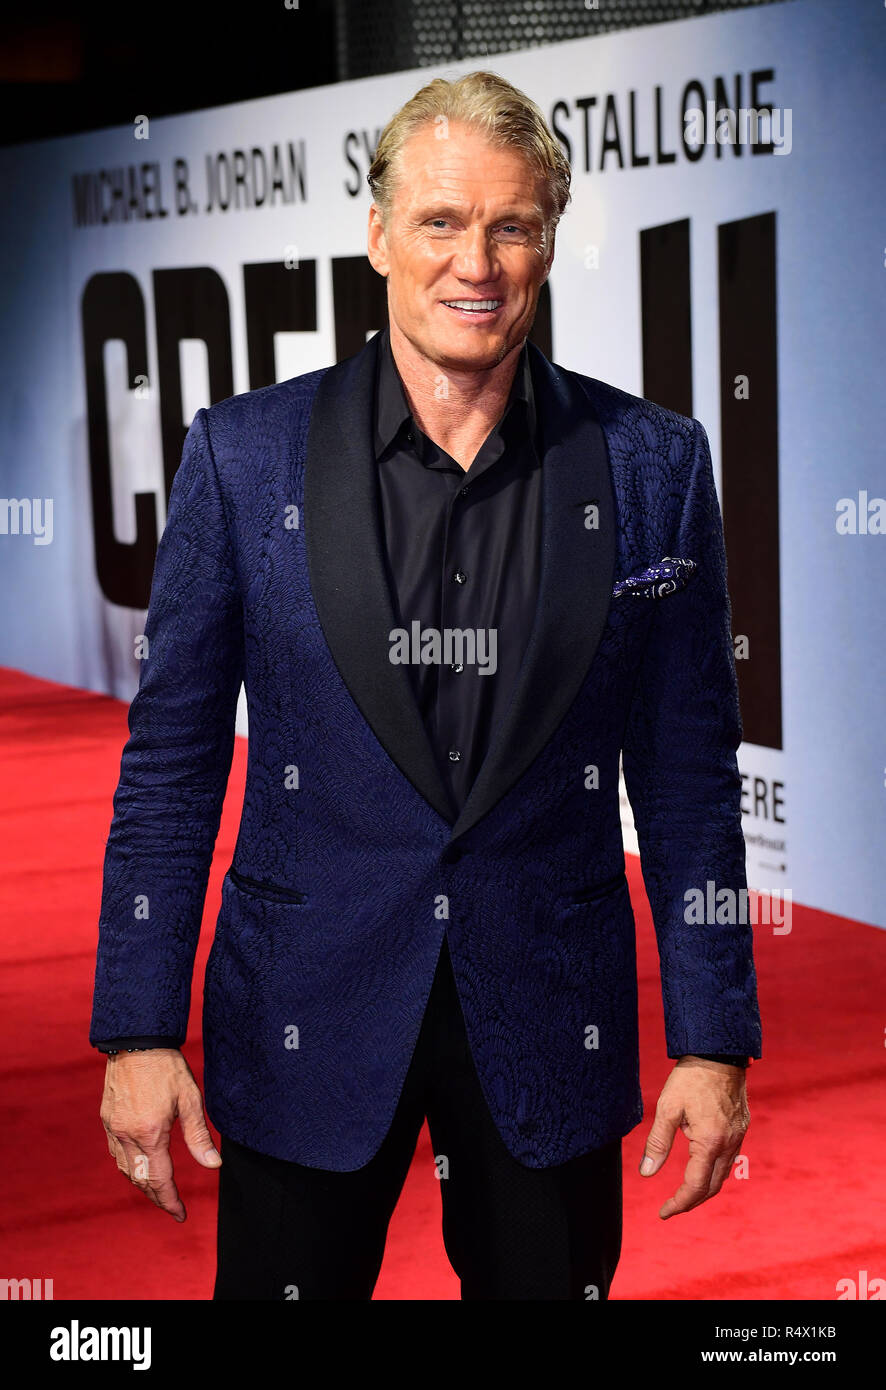 Dolph Lundgren attending the European premiere of Creed 2 held at the BFI Imax, Waterloo, London. Stock Photo